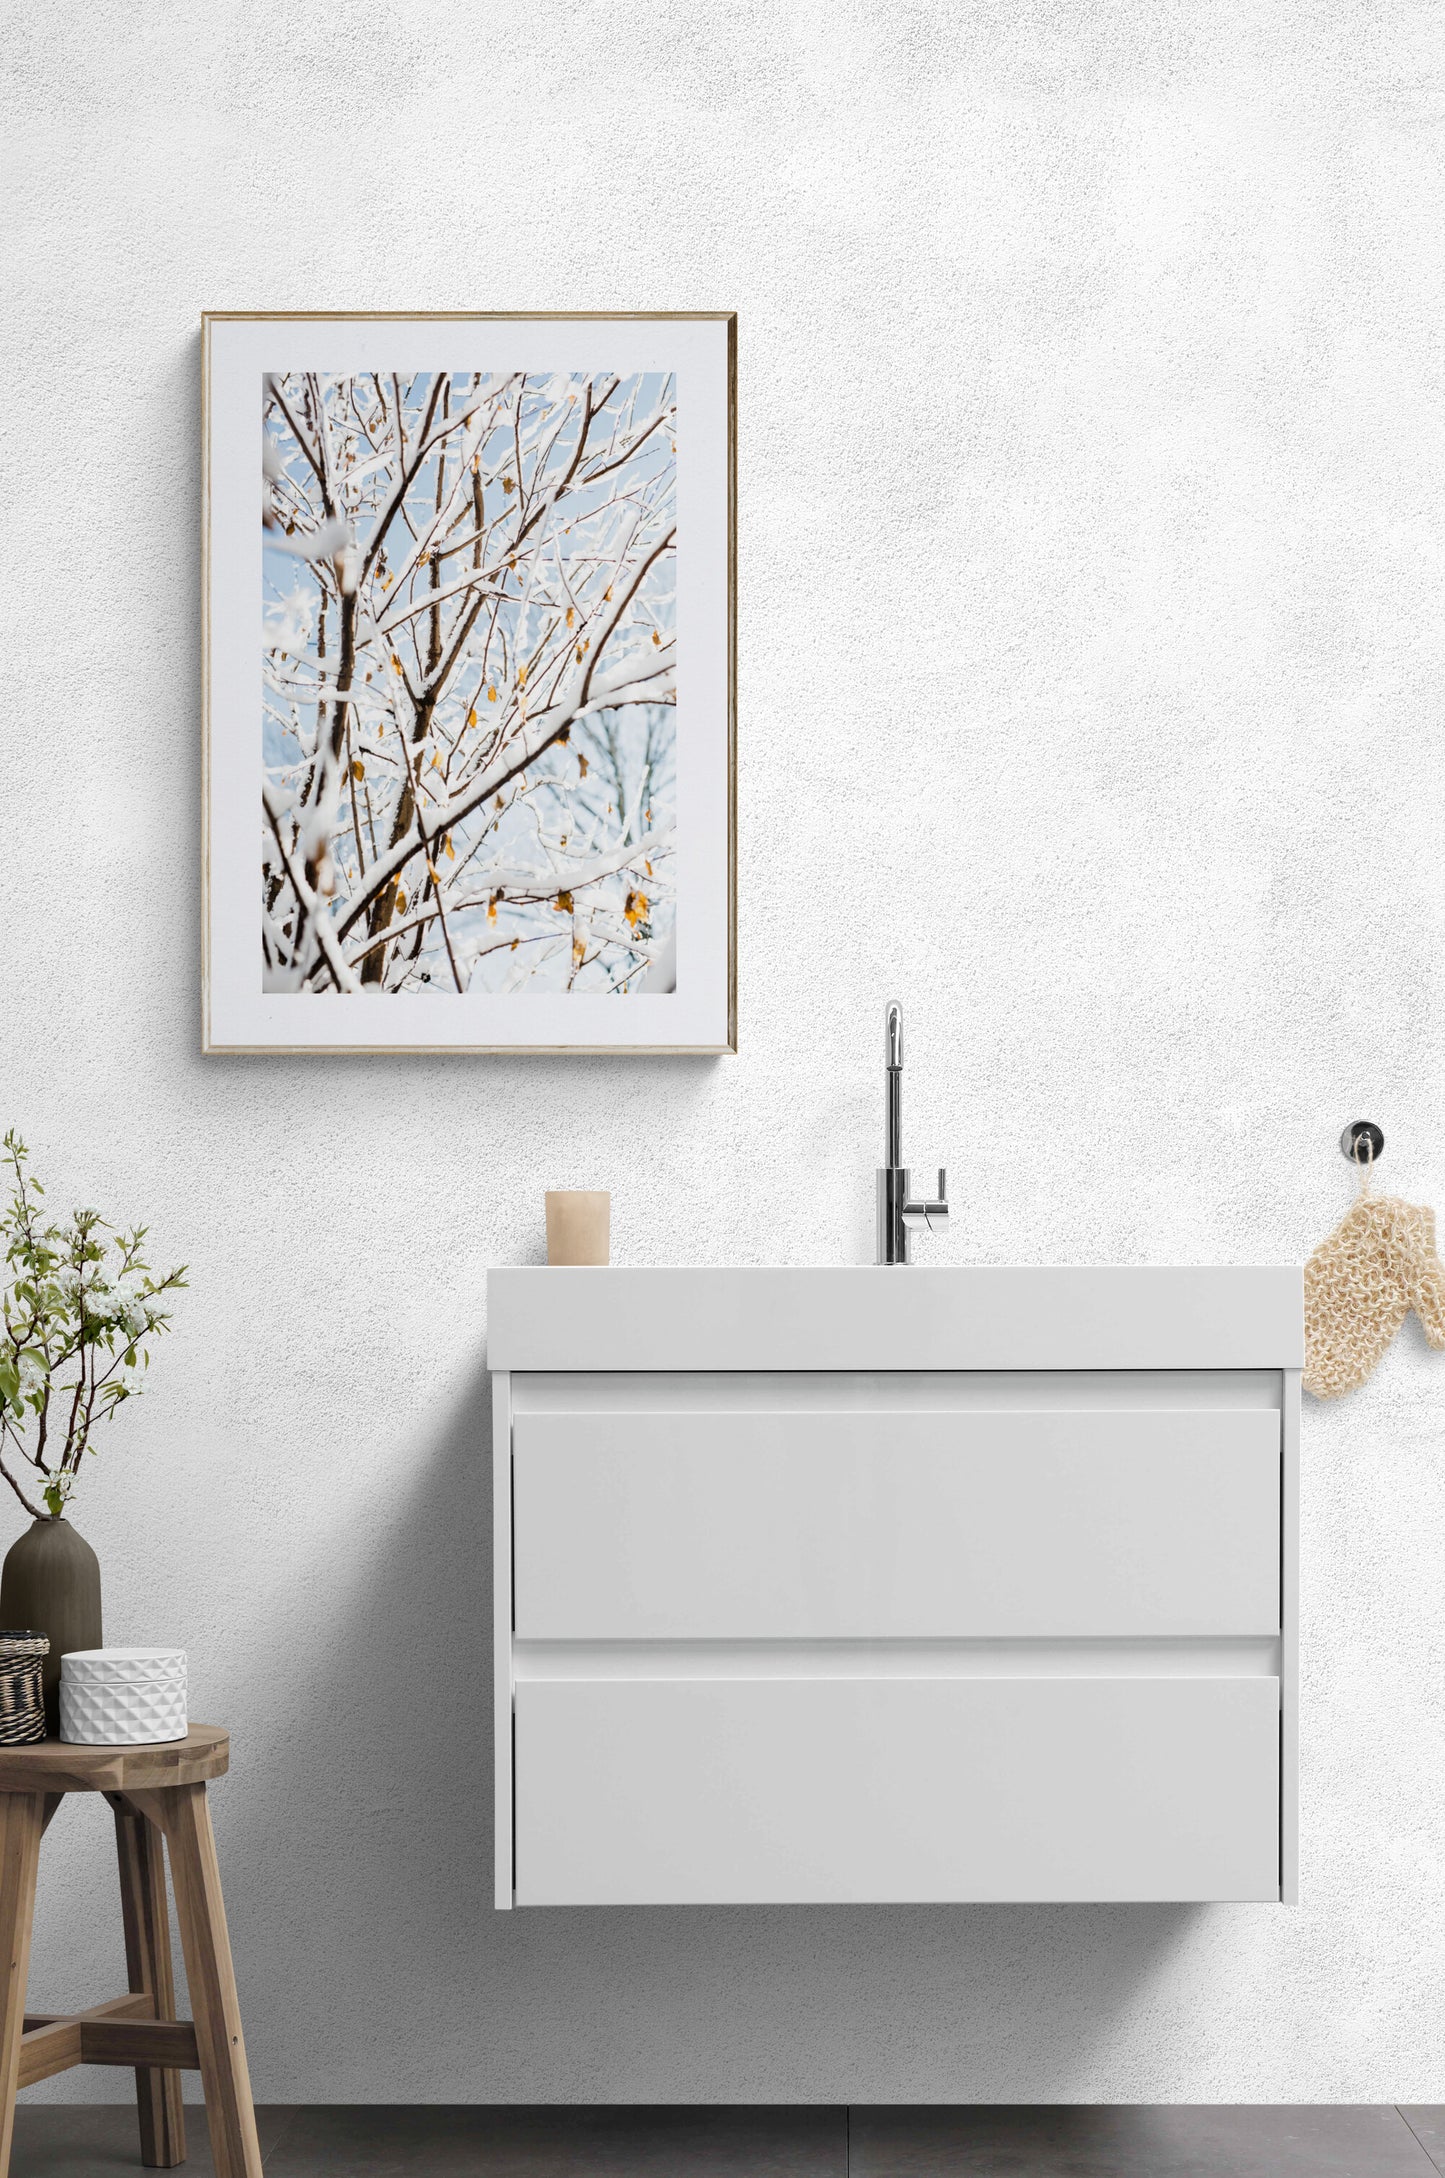 Photograph print of snow covered branches as bathroom wall art